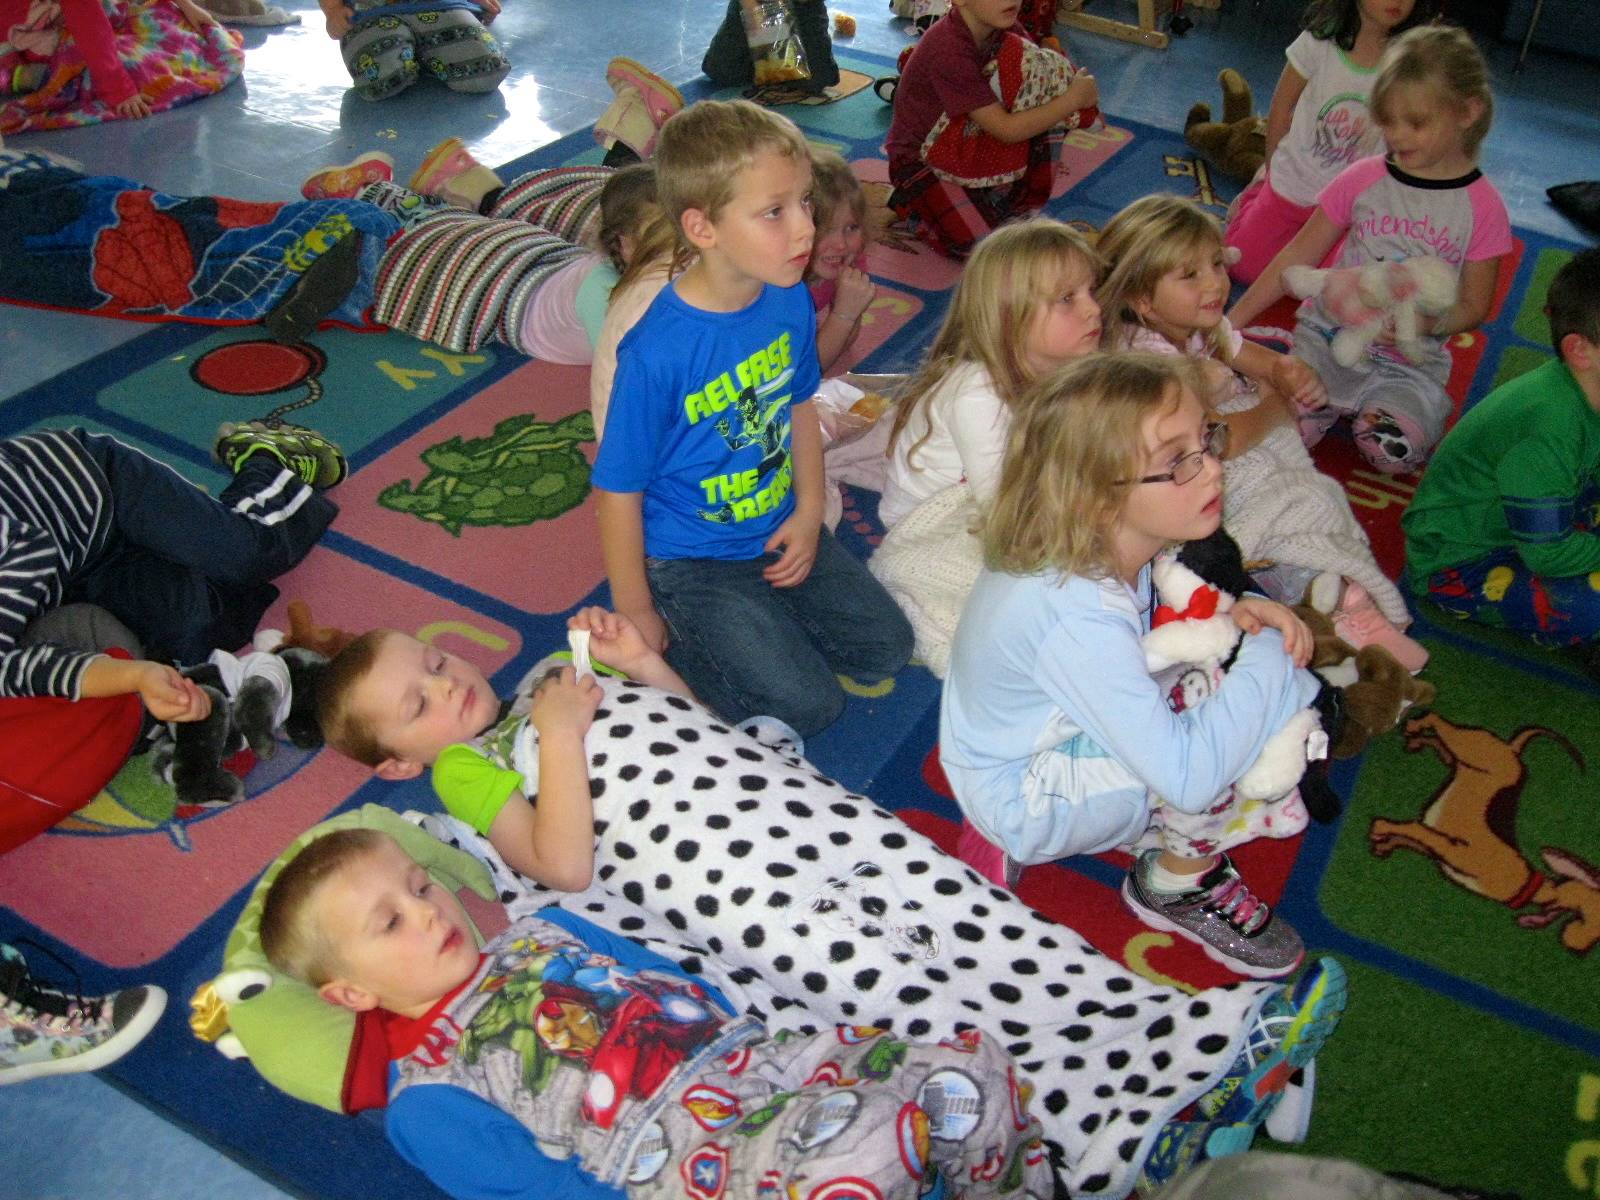 PAJAMA Party with blankets and stuffy's!